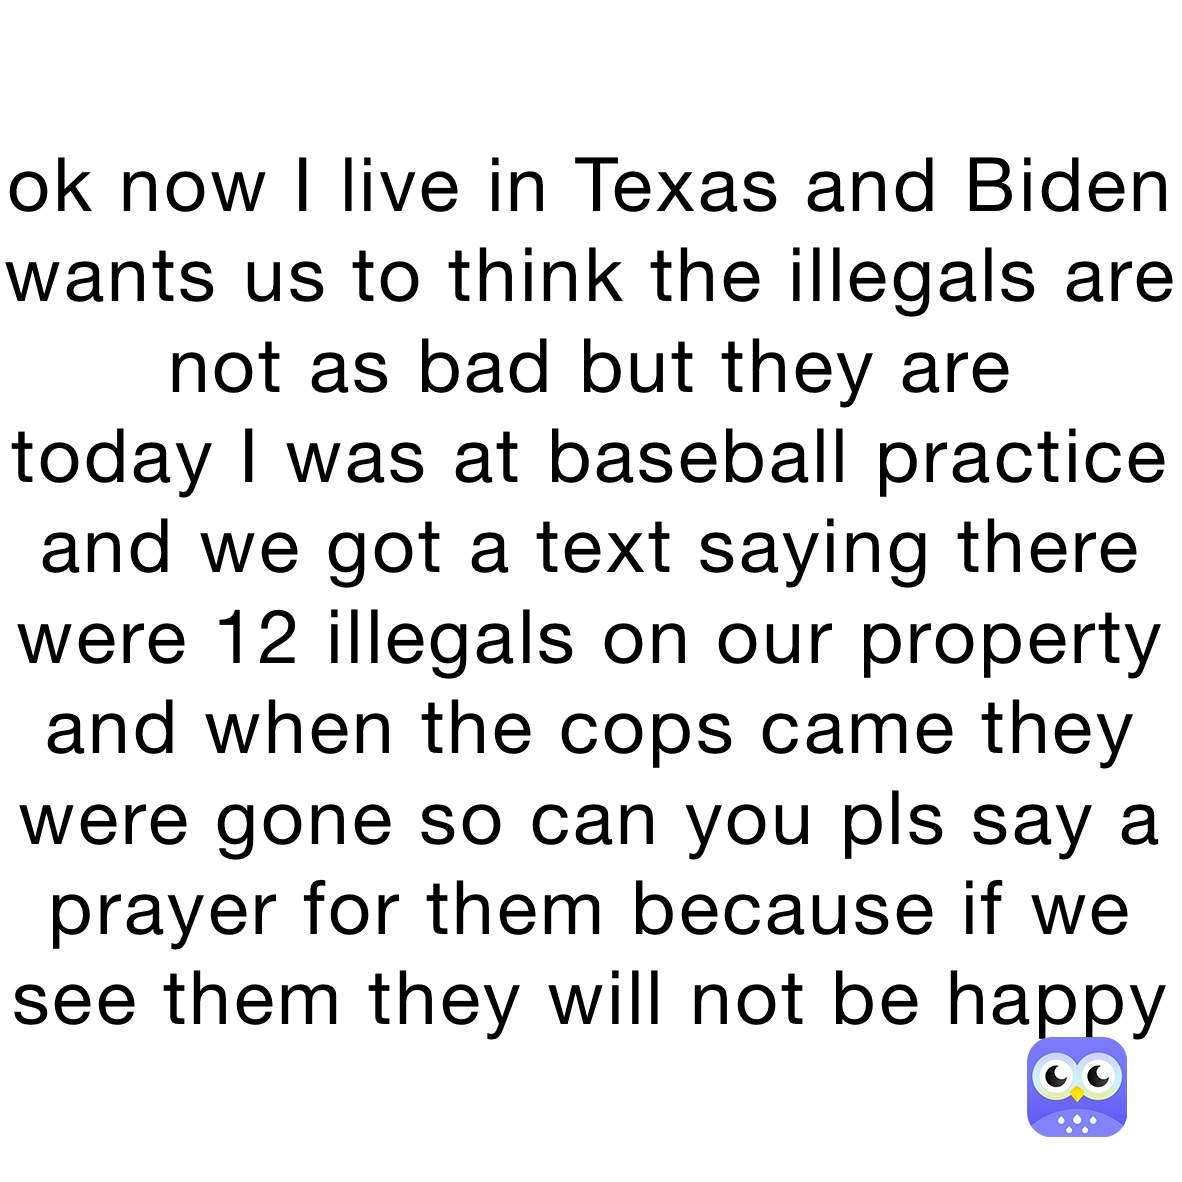 ok now I live in Texas and Biden wants us to think the illegals are not as bad but they are 
today I was at baseball practice and we got a text saying there were 12 illegals on our property 
and when the cops came they were gone so can you pls say a prayer for them because if we see them they will not be happy